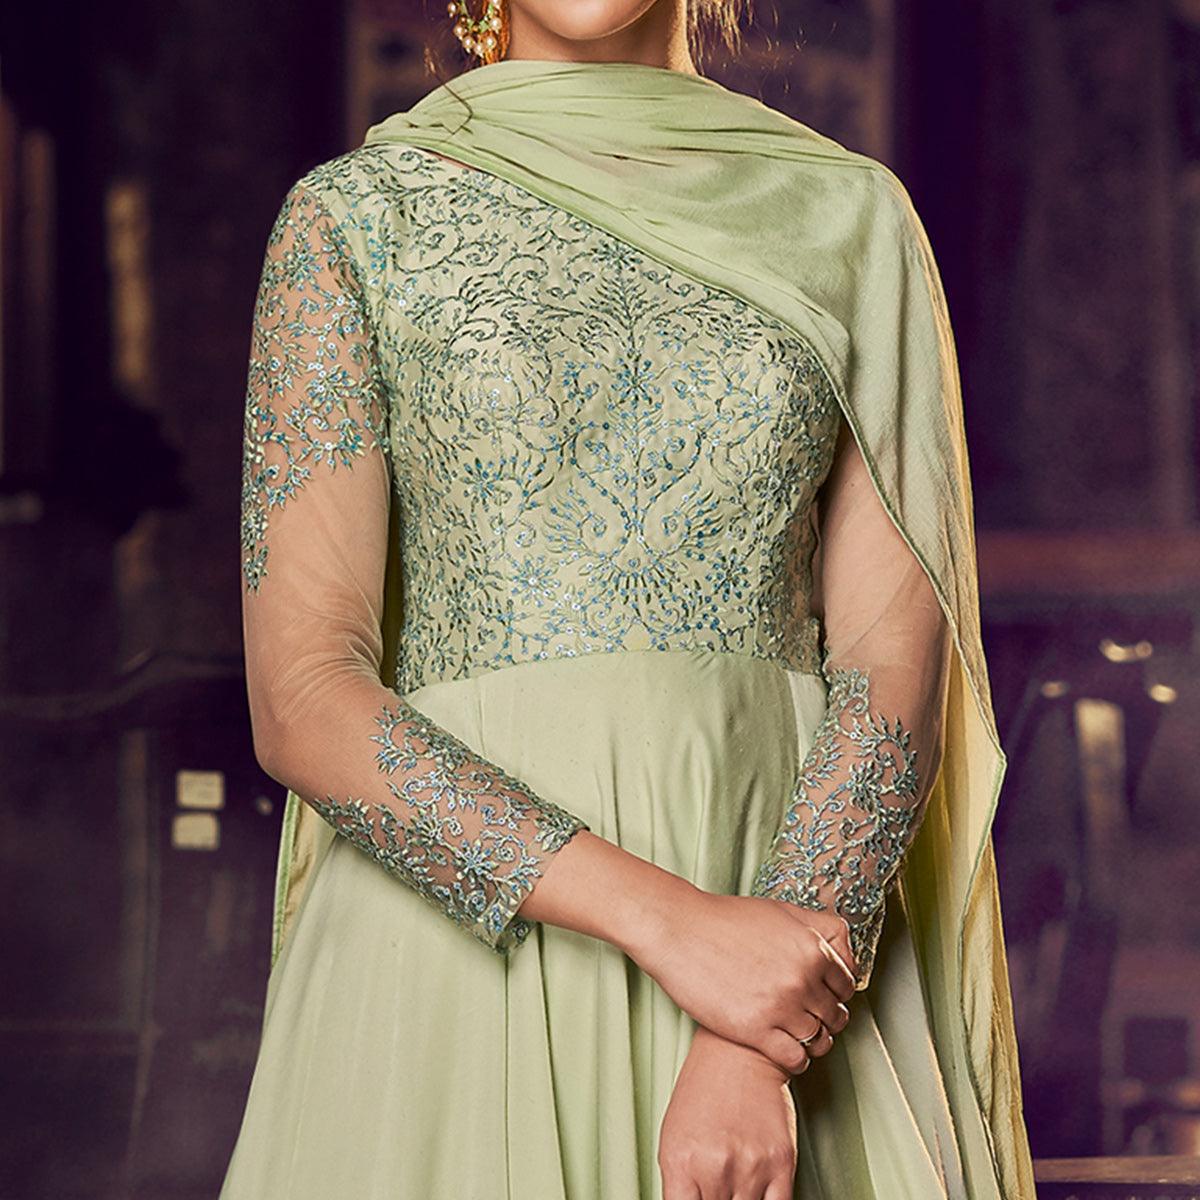 NEW DESIGNER GREEN COLORED PARTY WEAR GOWN G02 – 𝐋𝐎𝐎𝐊𝐒 𝐀𝐍𝐃  𝐋𝐈𝐊𝐄𝐒